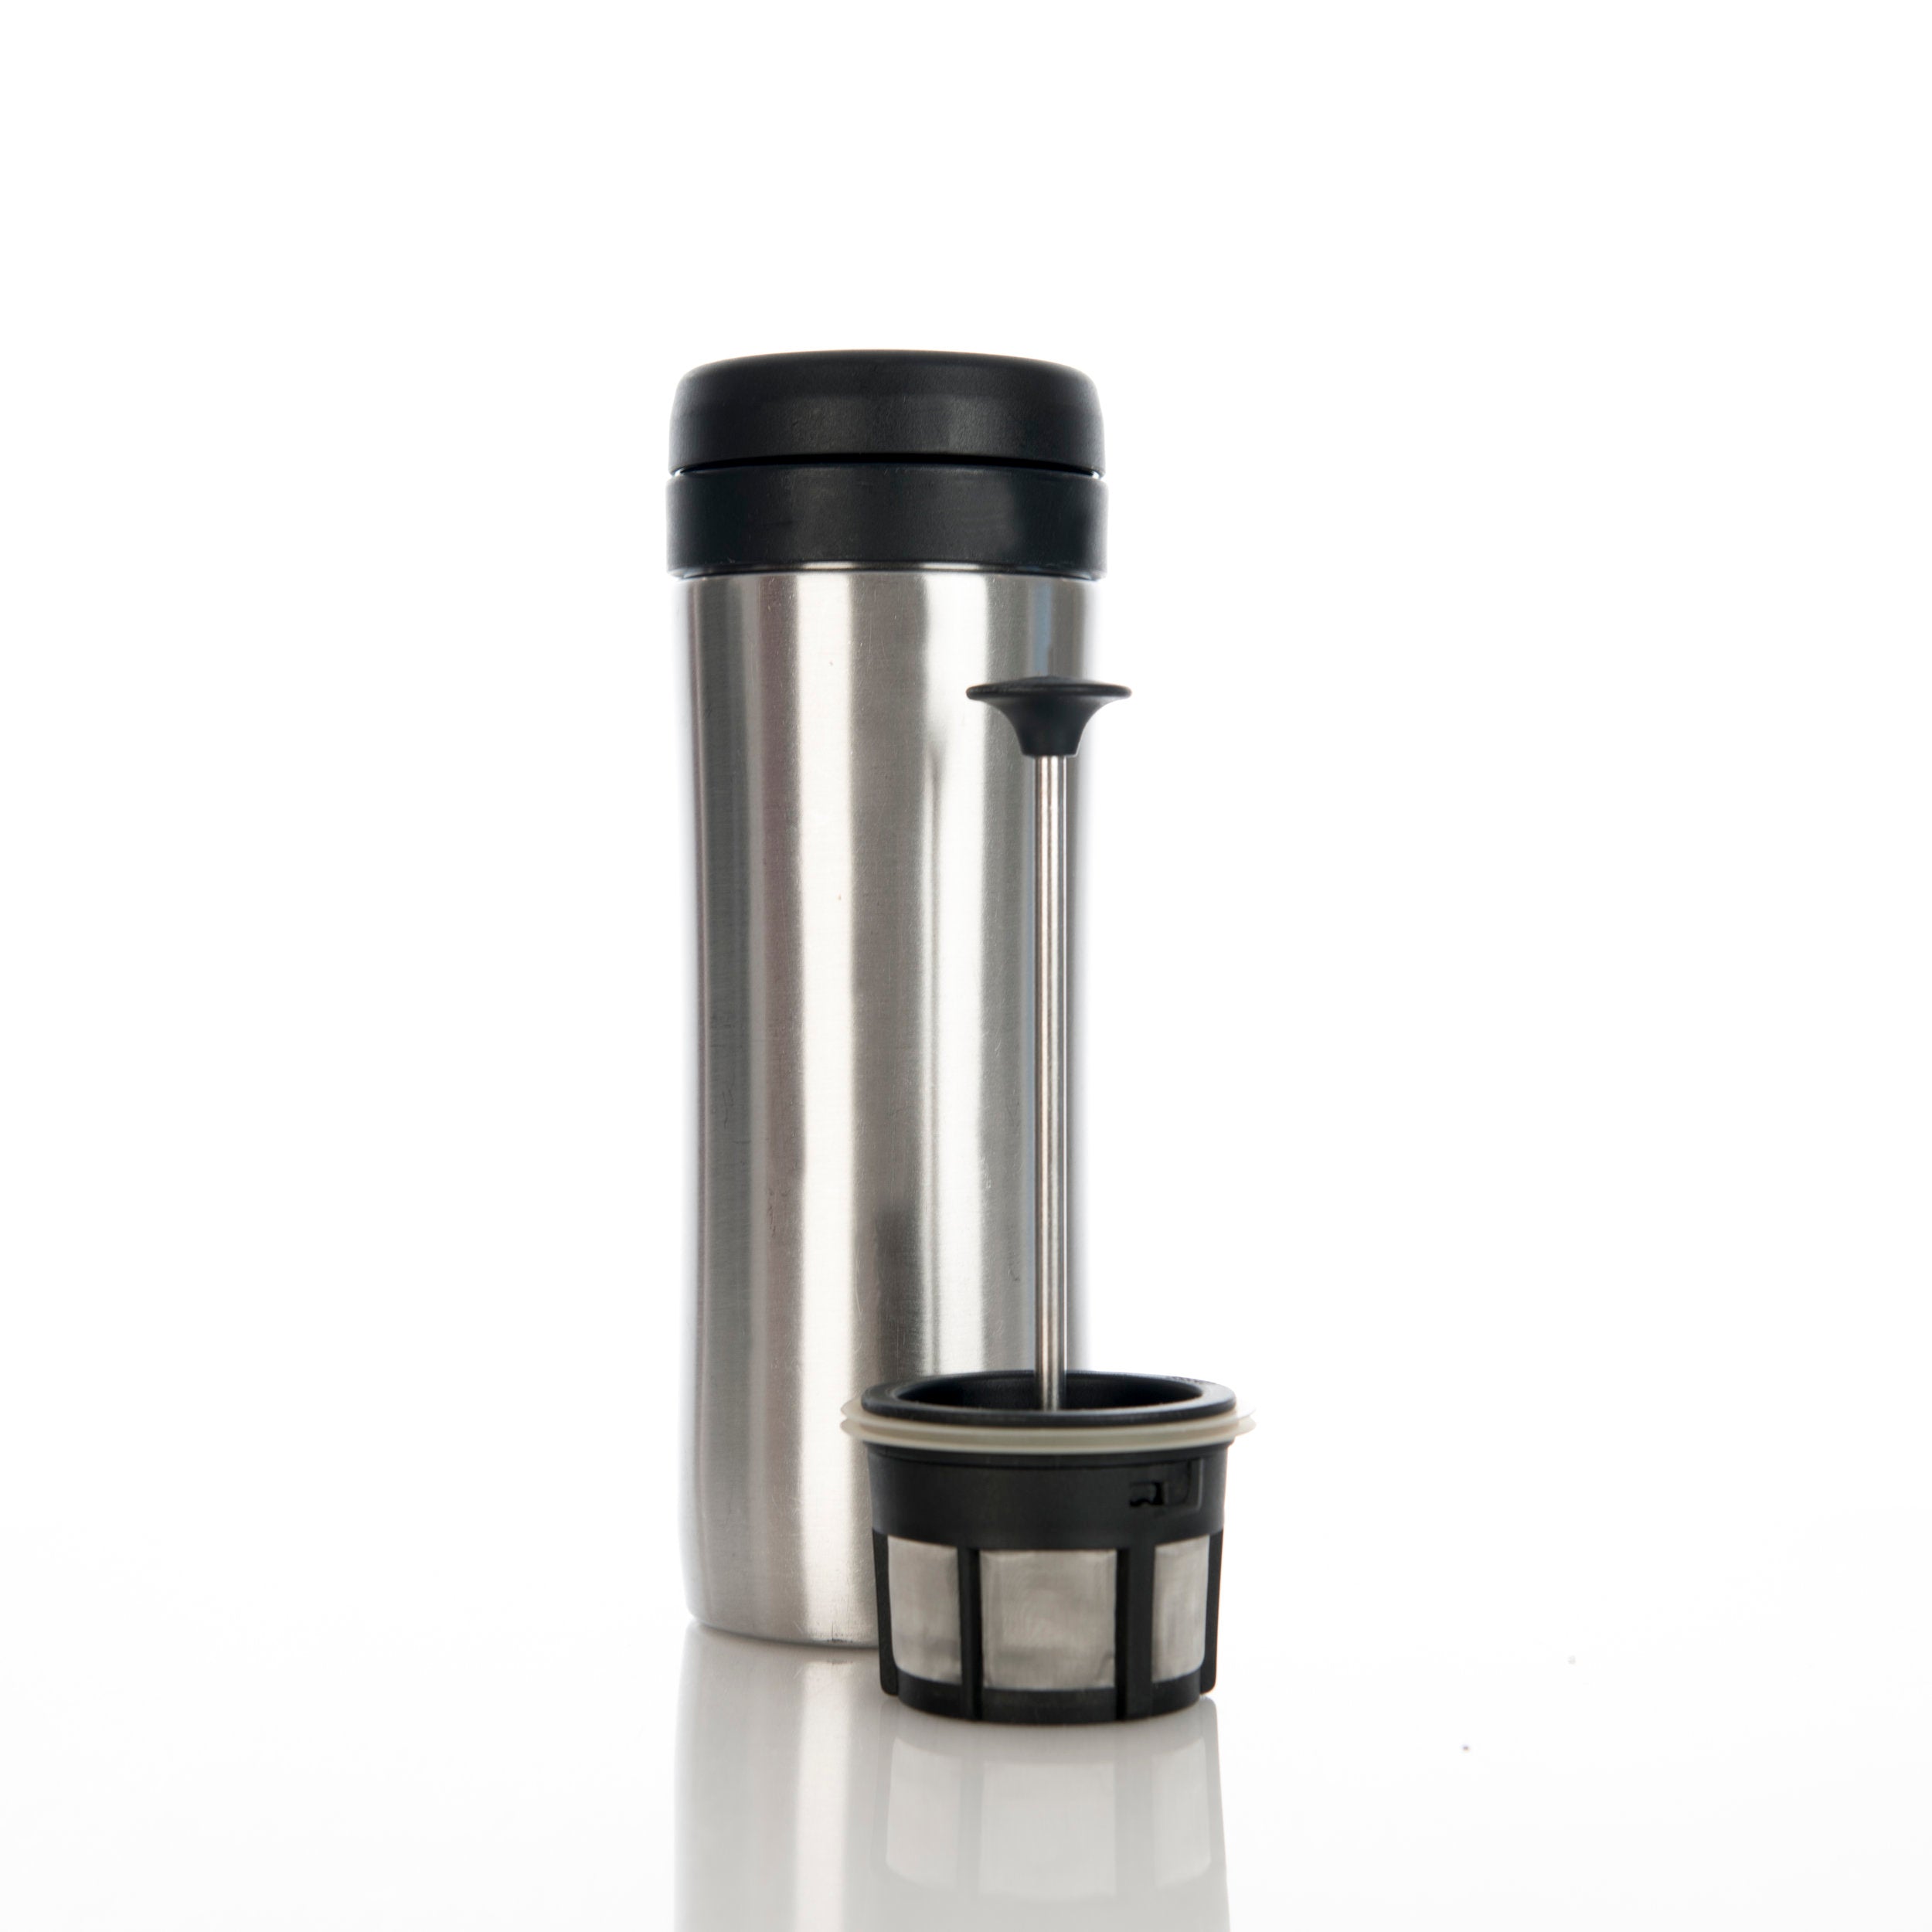 Espro Travel Press: How to make French Press Style Coffee